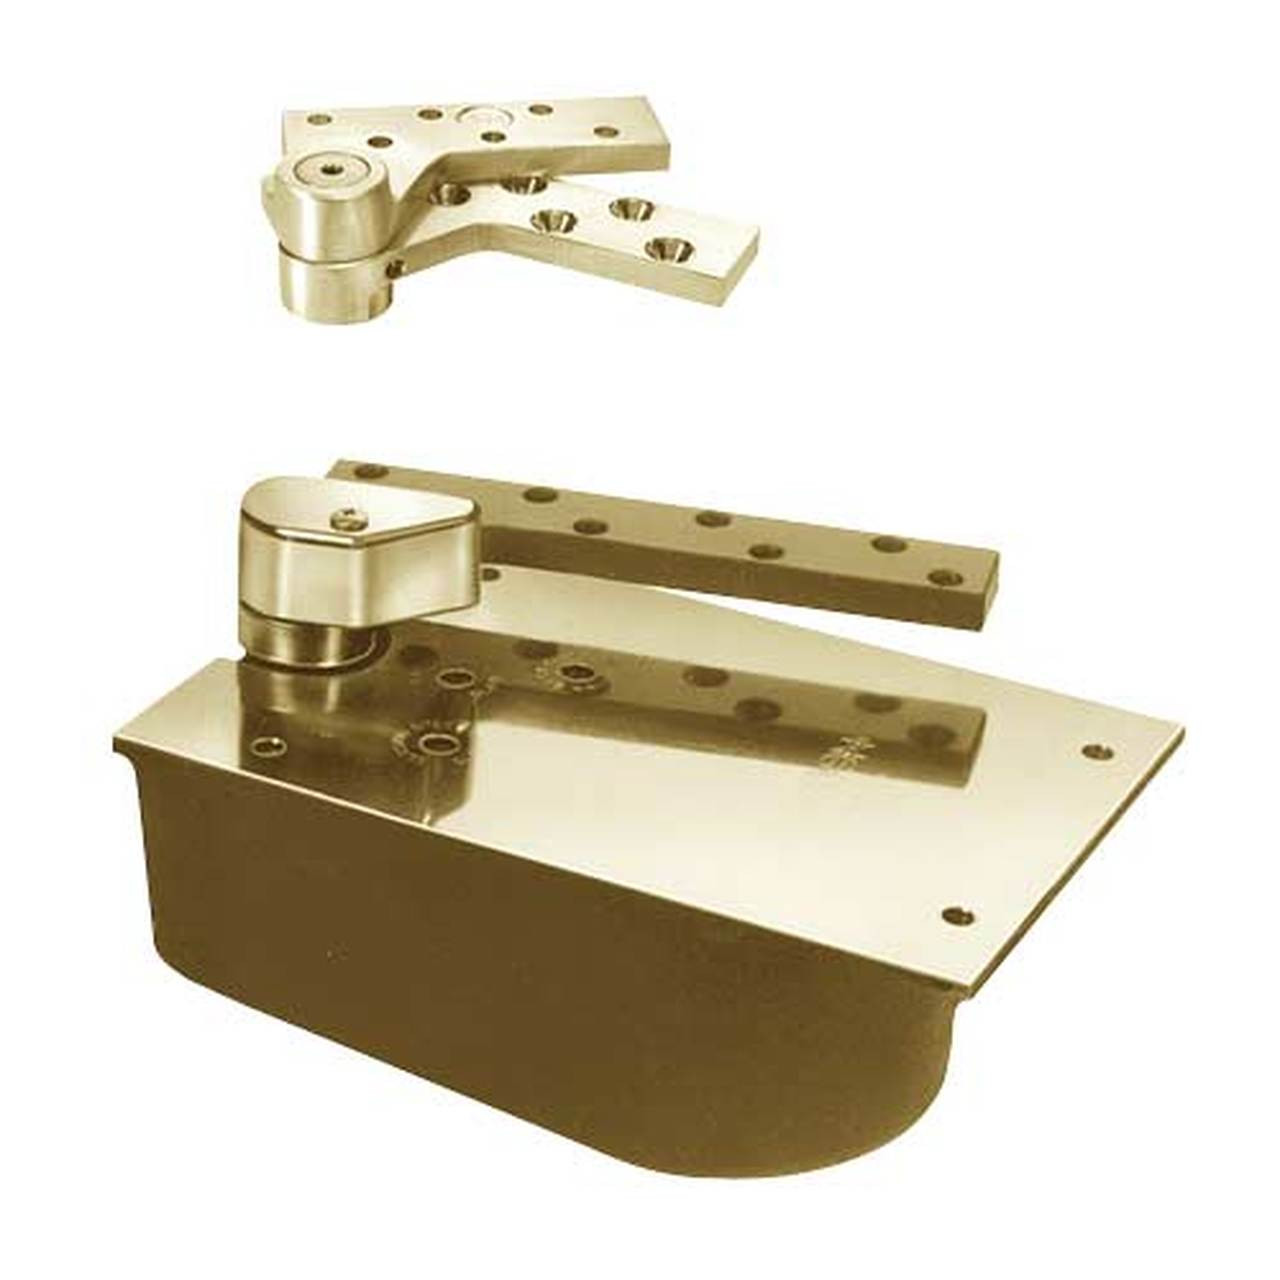 L27-90N-LFP-LCC-RH-2-1/4-606 Rixson 27 Series Extra Heavy Duty Lead Lined Offset Floor Closer in Satin Brass Finish